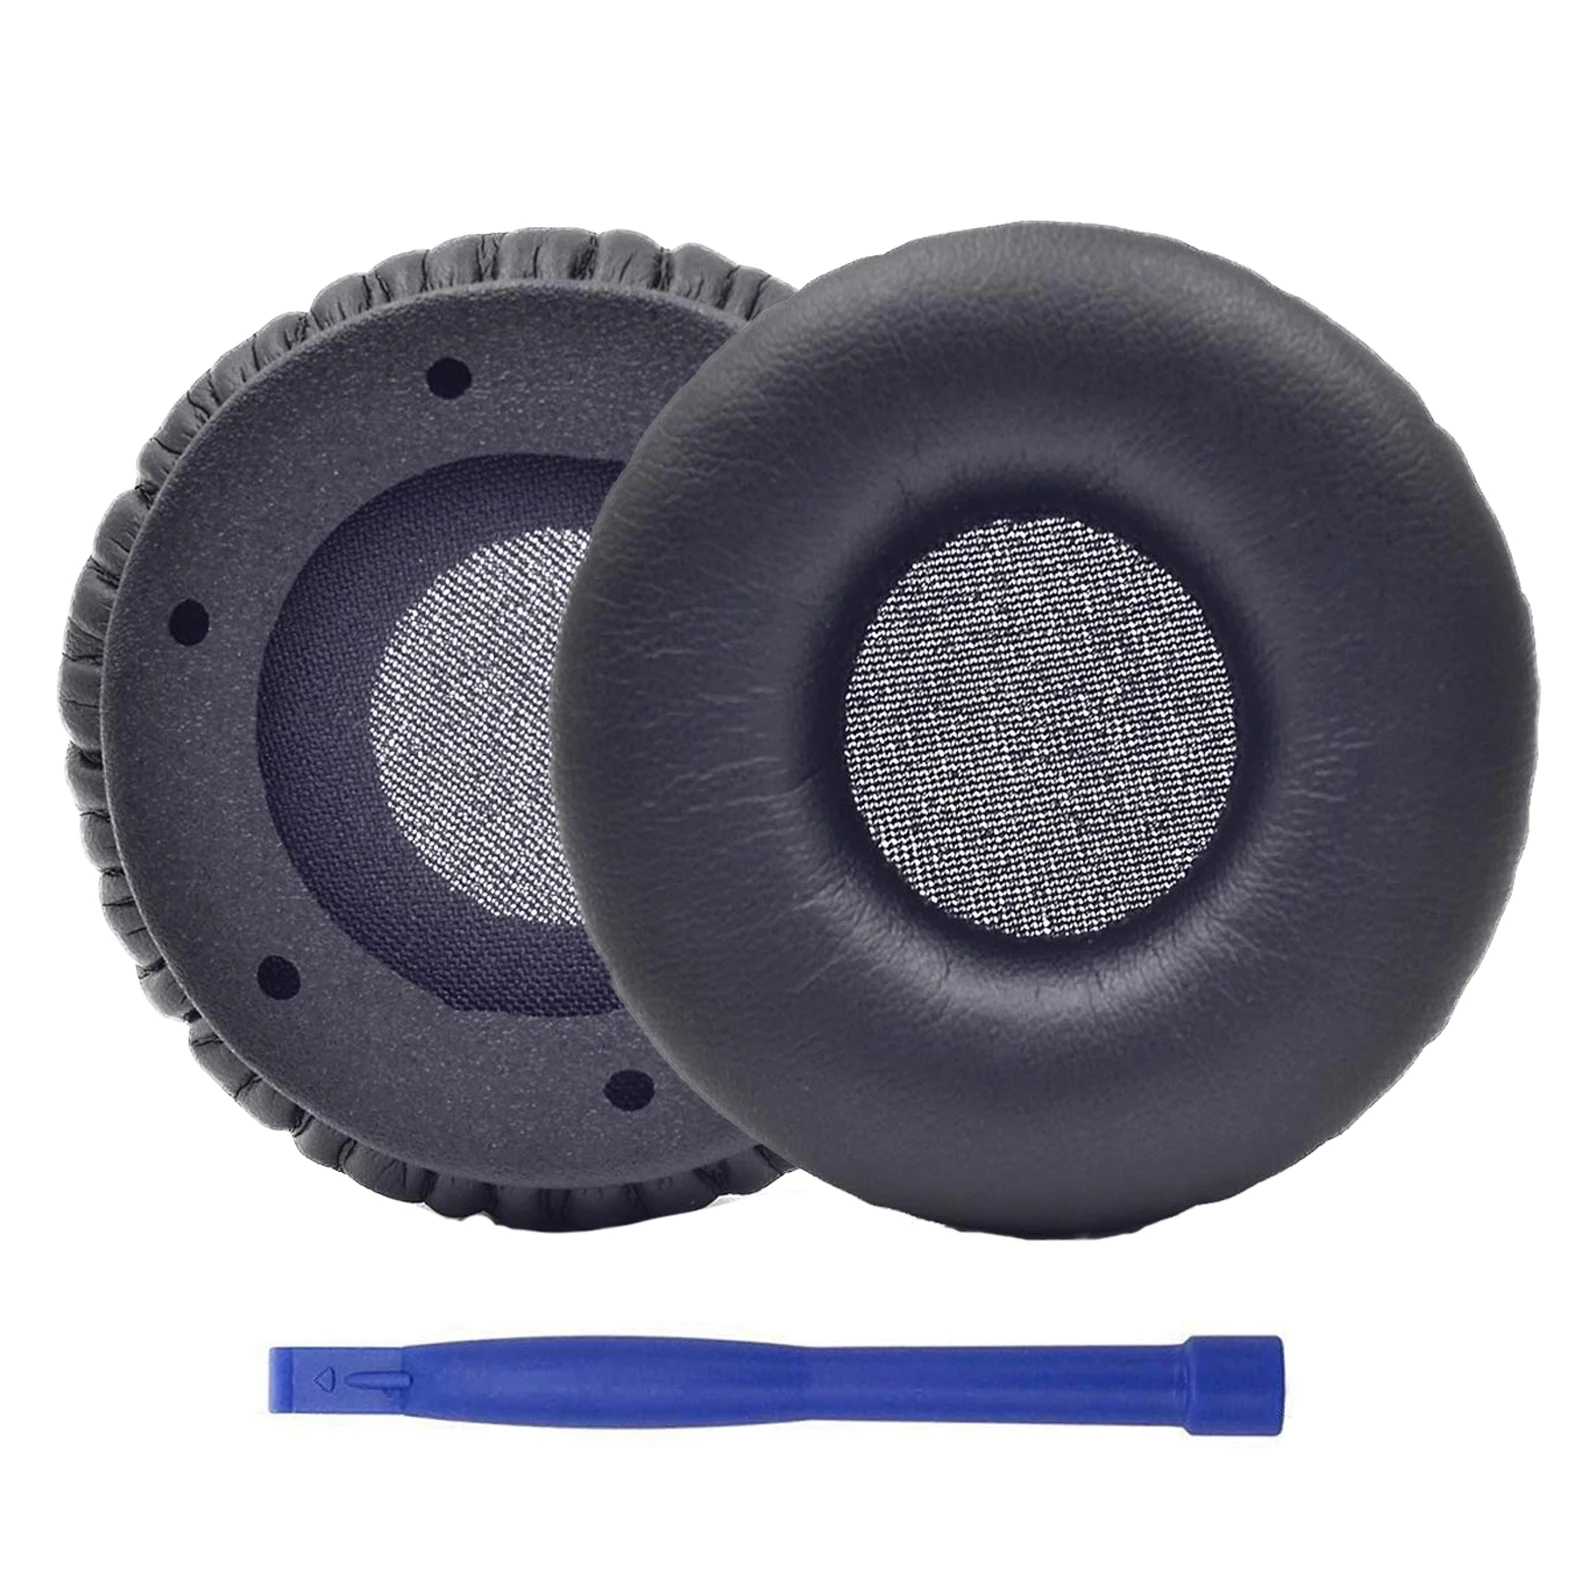 

1Pair Replacement Ear Pads Earpads Headband Repair Parts for Sol Republic Tracks HD V10 V8 On-Ear Wired Headsets Headphones